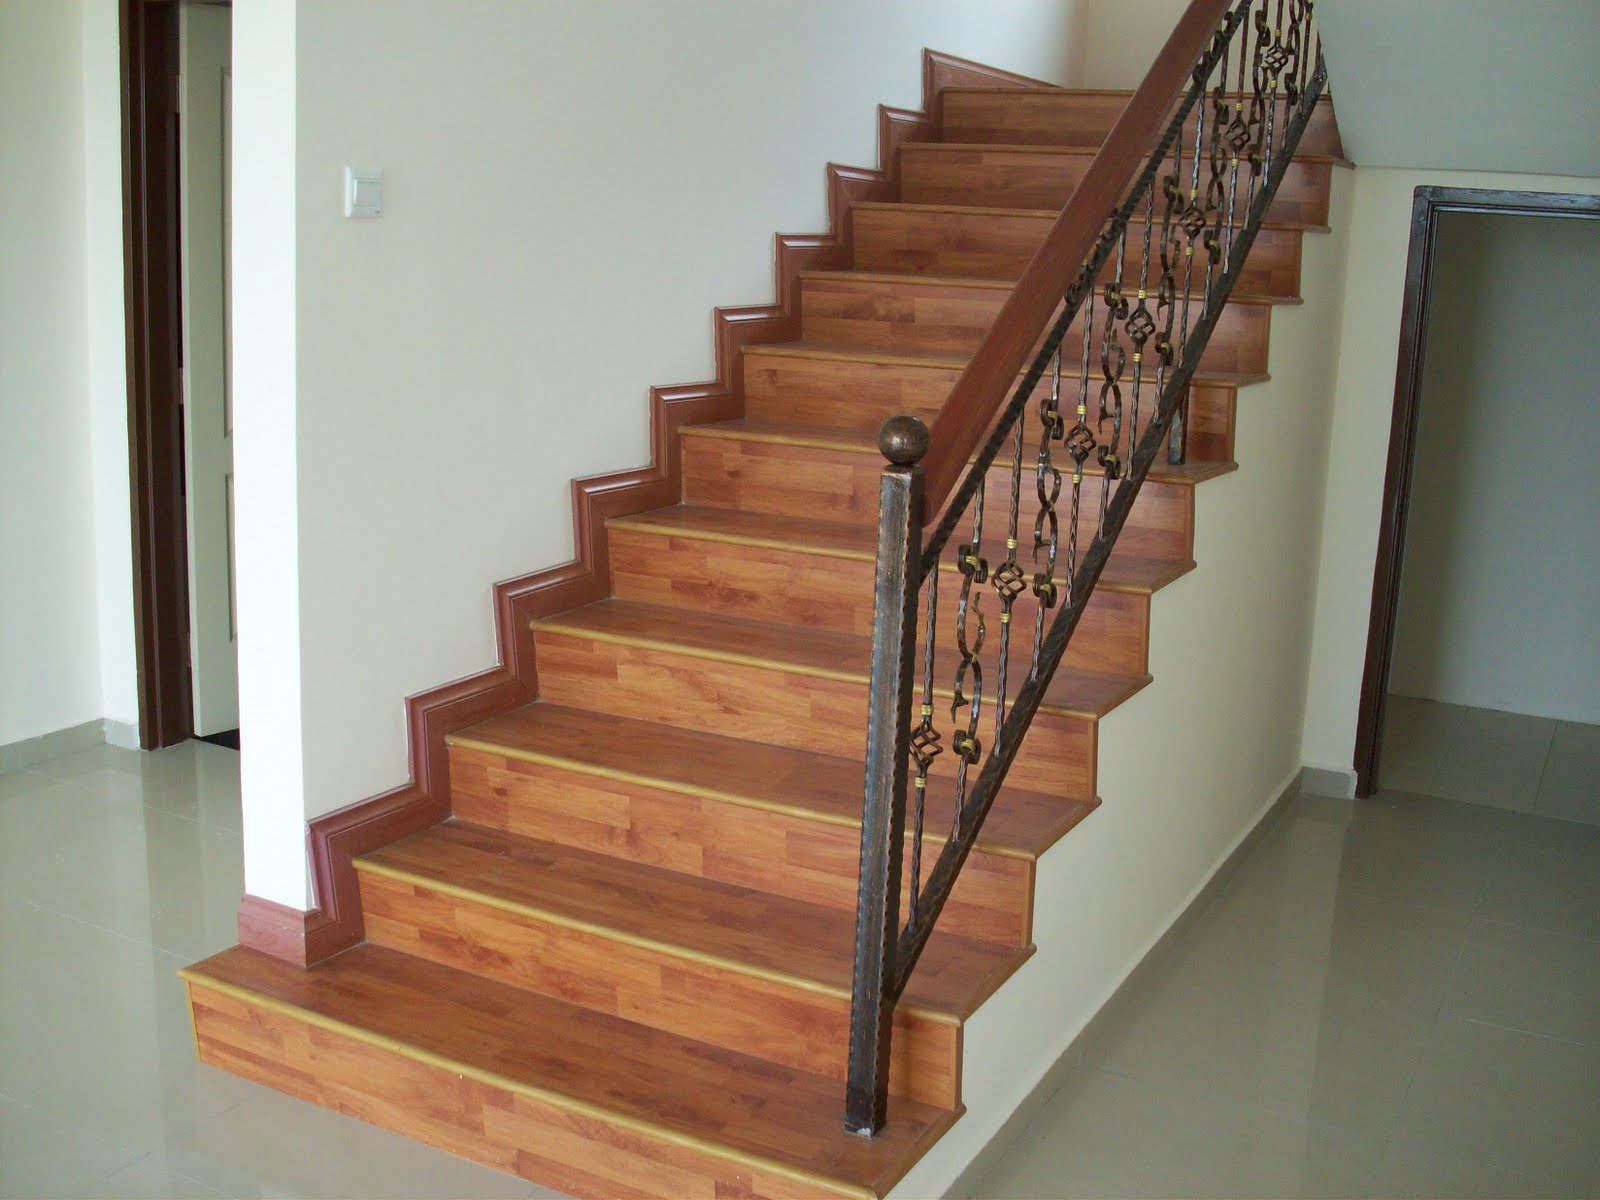 How To Install Wood Flooring On Stairs, Can You Put Hardwood Floors On Stairs